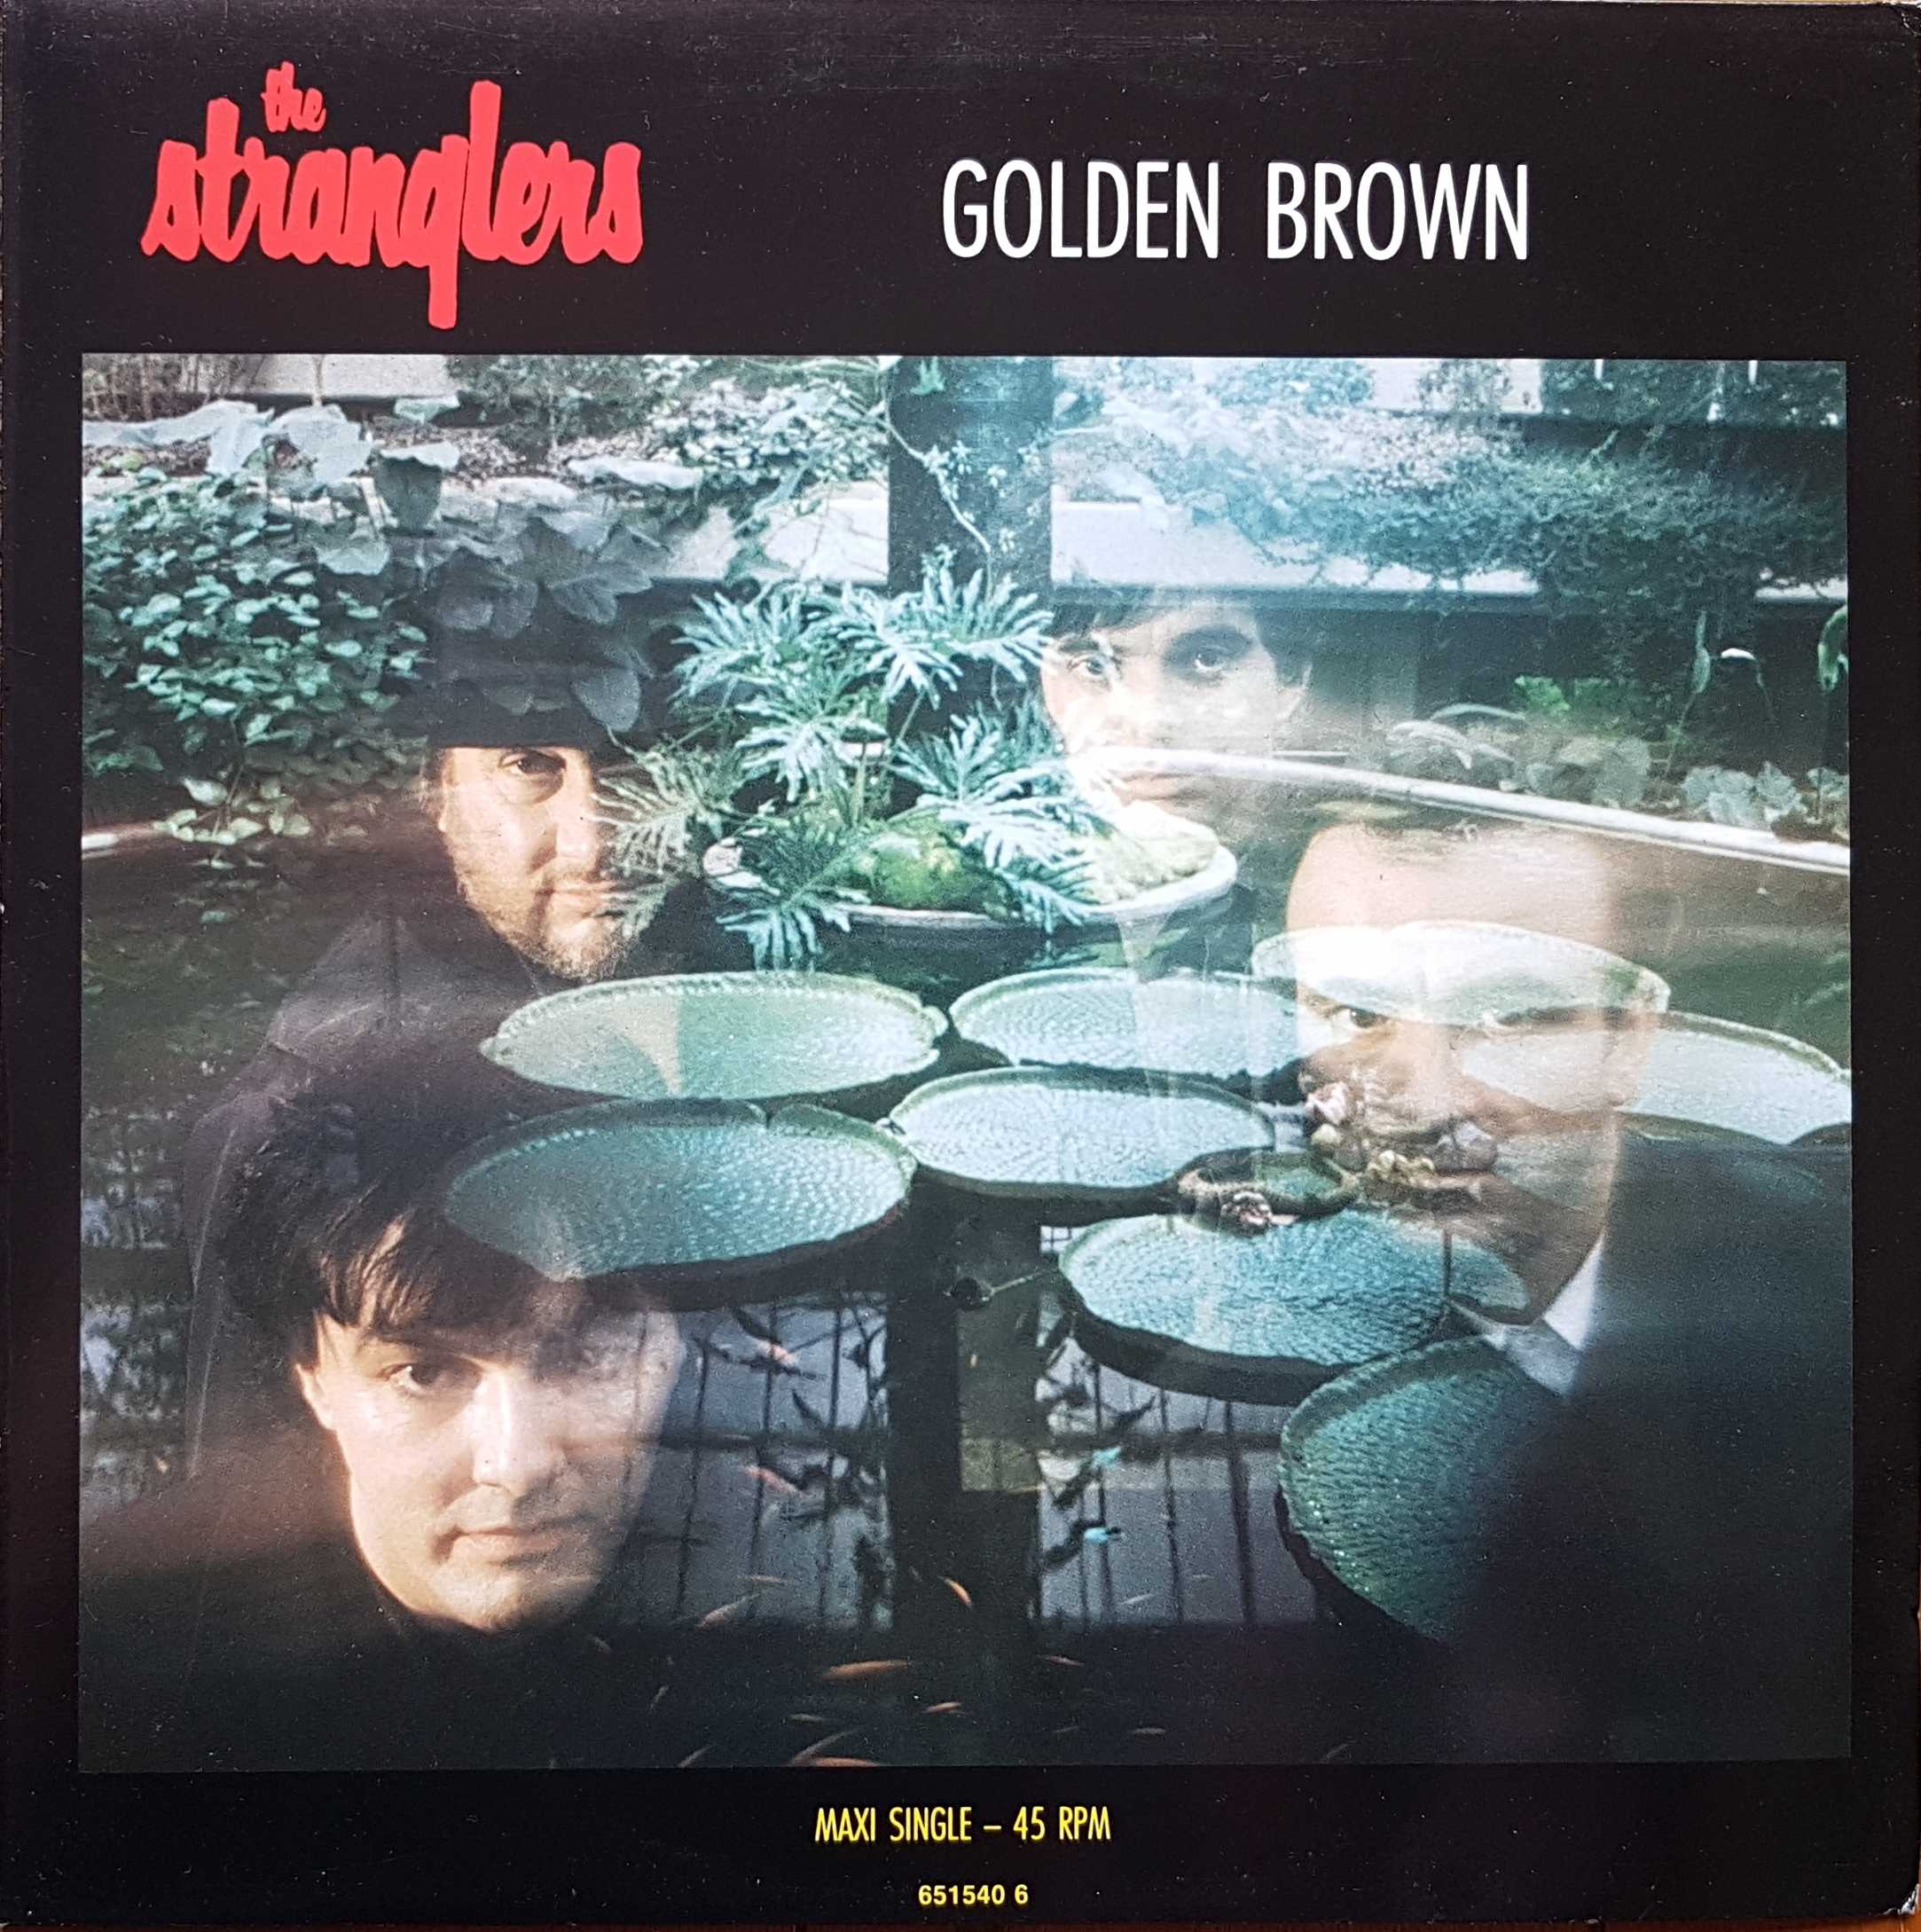 Picture of 651540 6 Golden brown by artist The Stranglers from The Stranglers